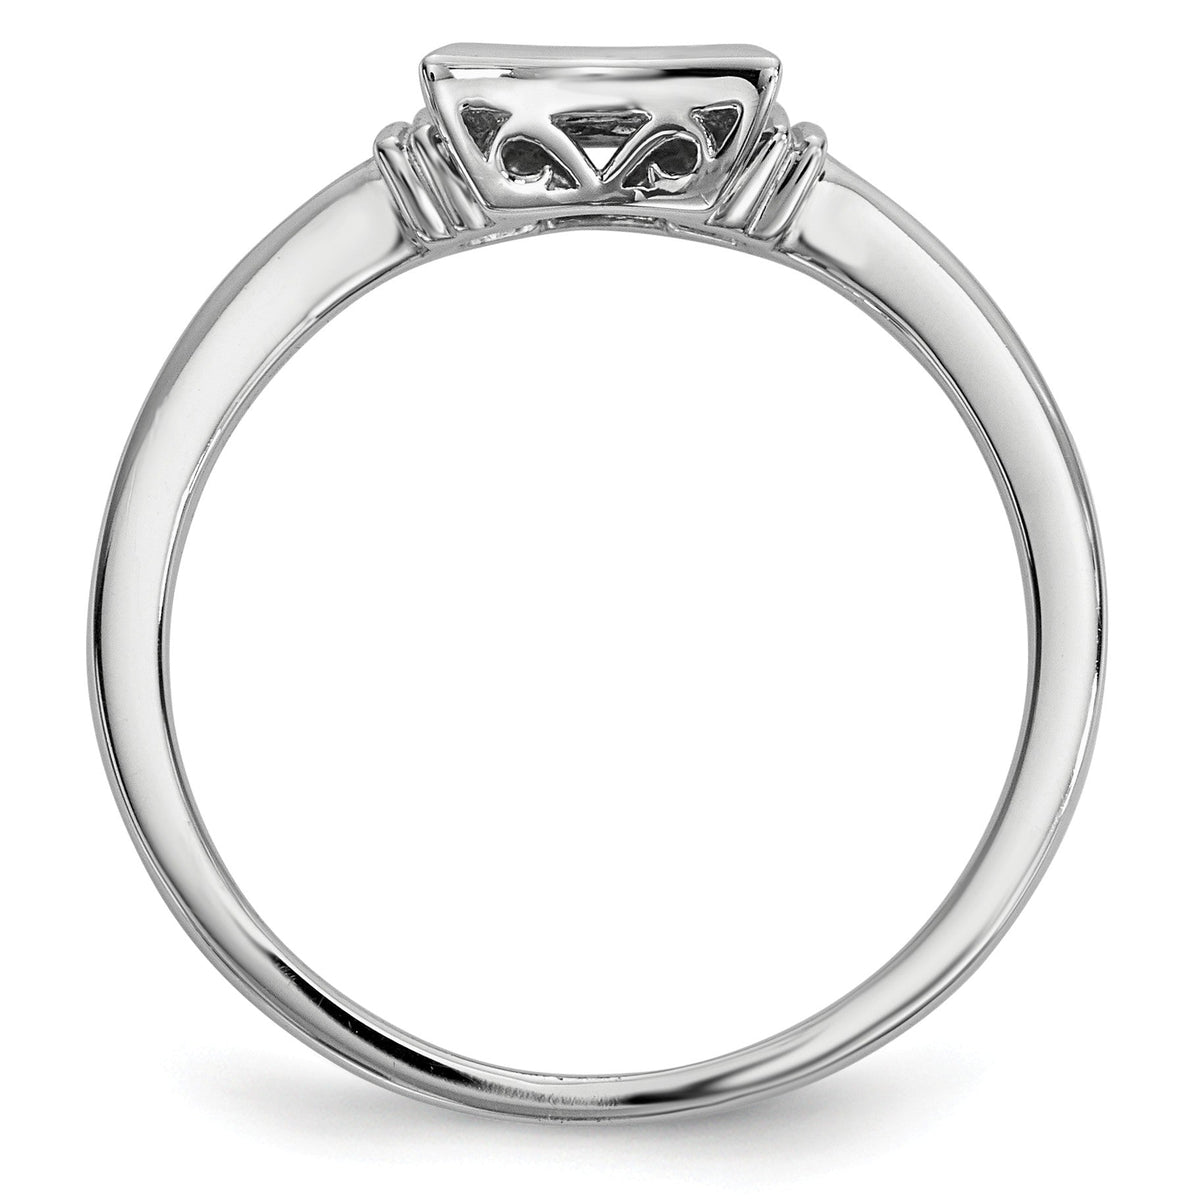 Alternate view of the 1/20 Ctw Blue Diamond 6mm Concave Square Ring in Sterling Silver by The Black Bow Jewelry Co.